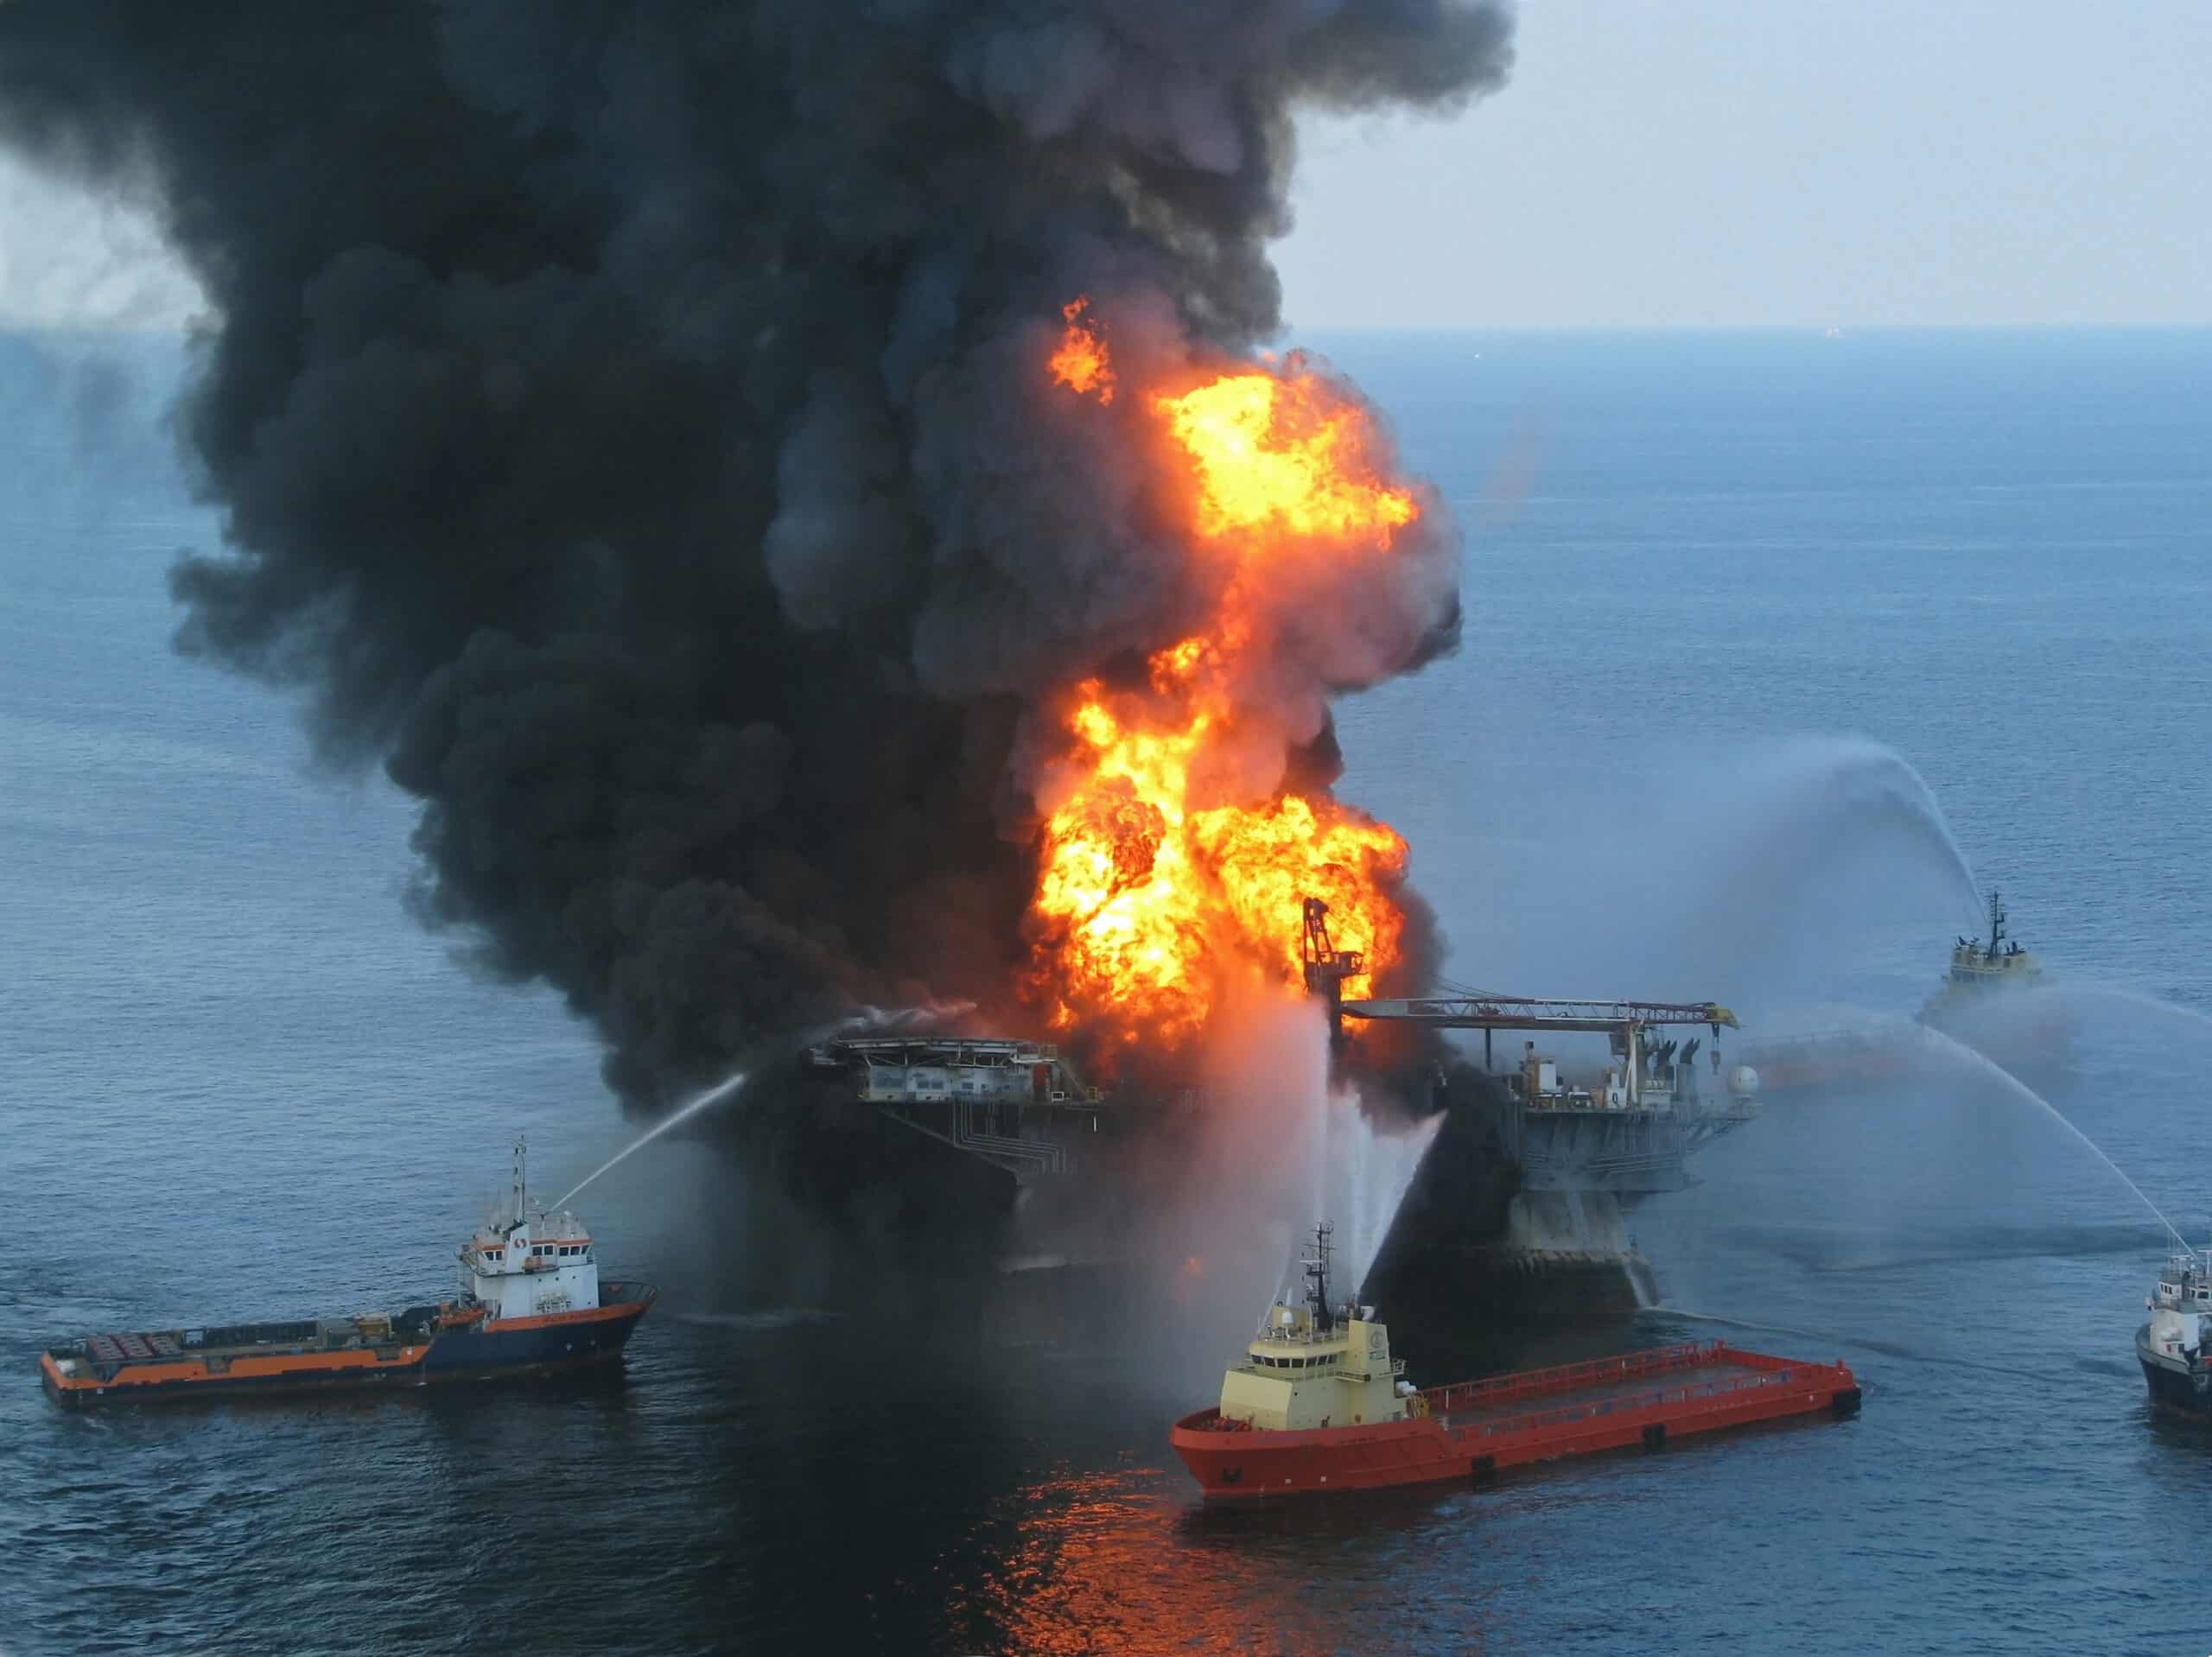 offshore injury due to an oil rig explosion